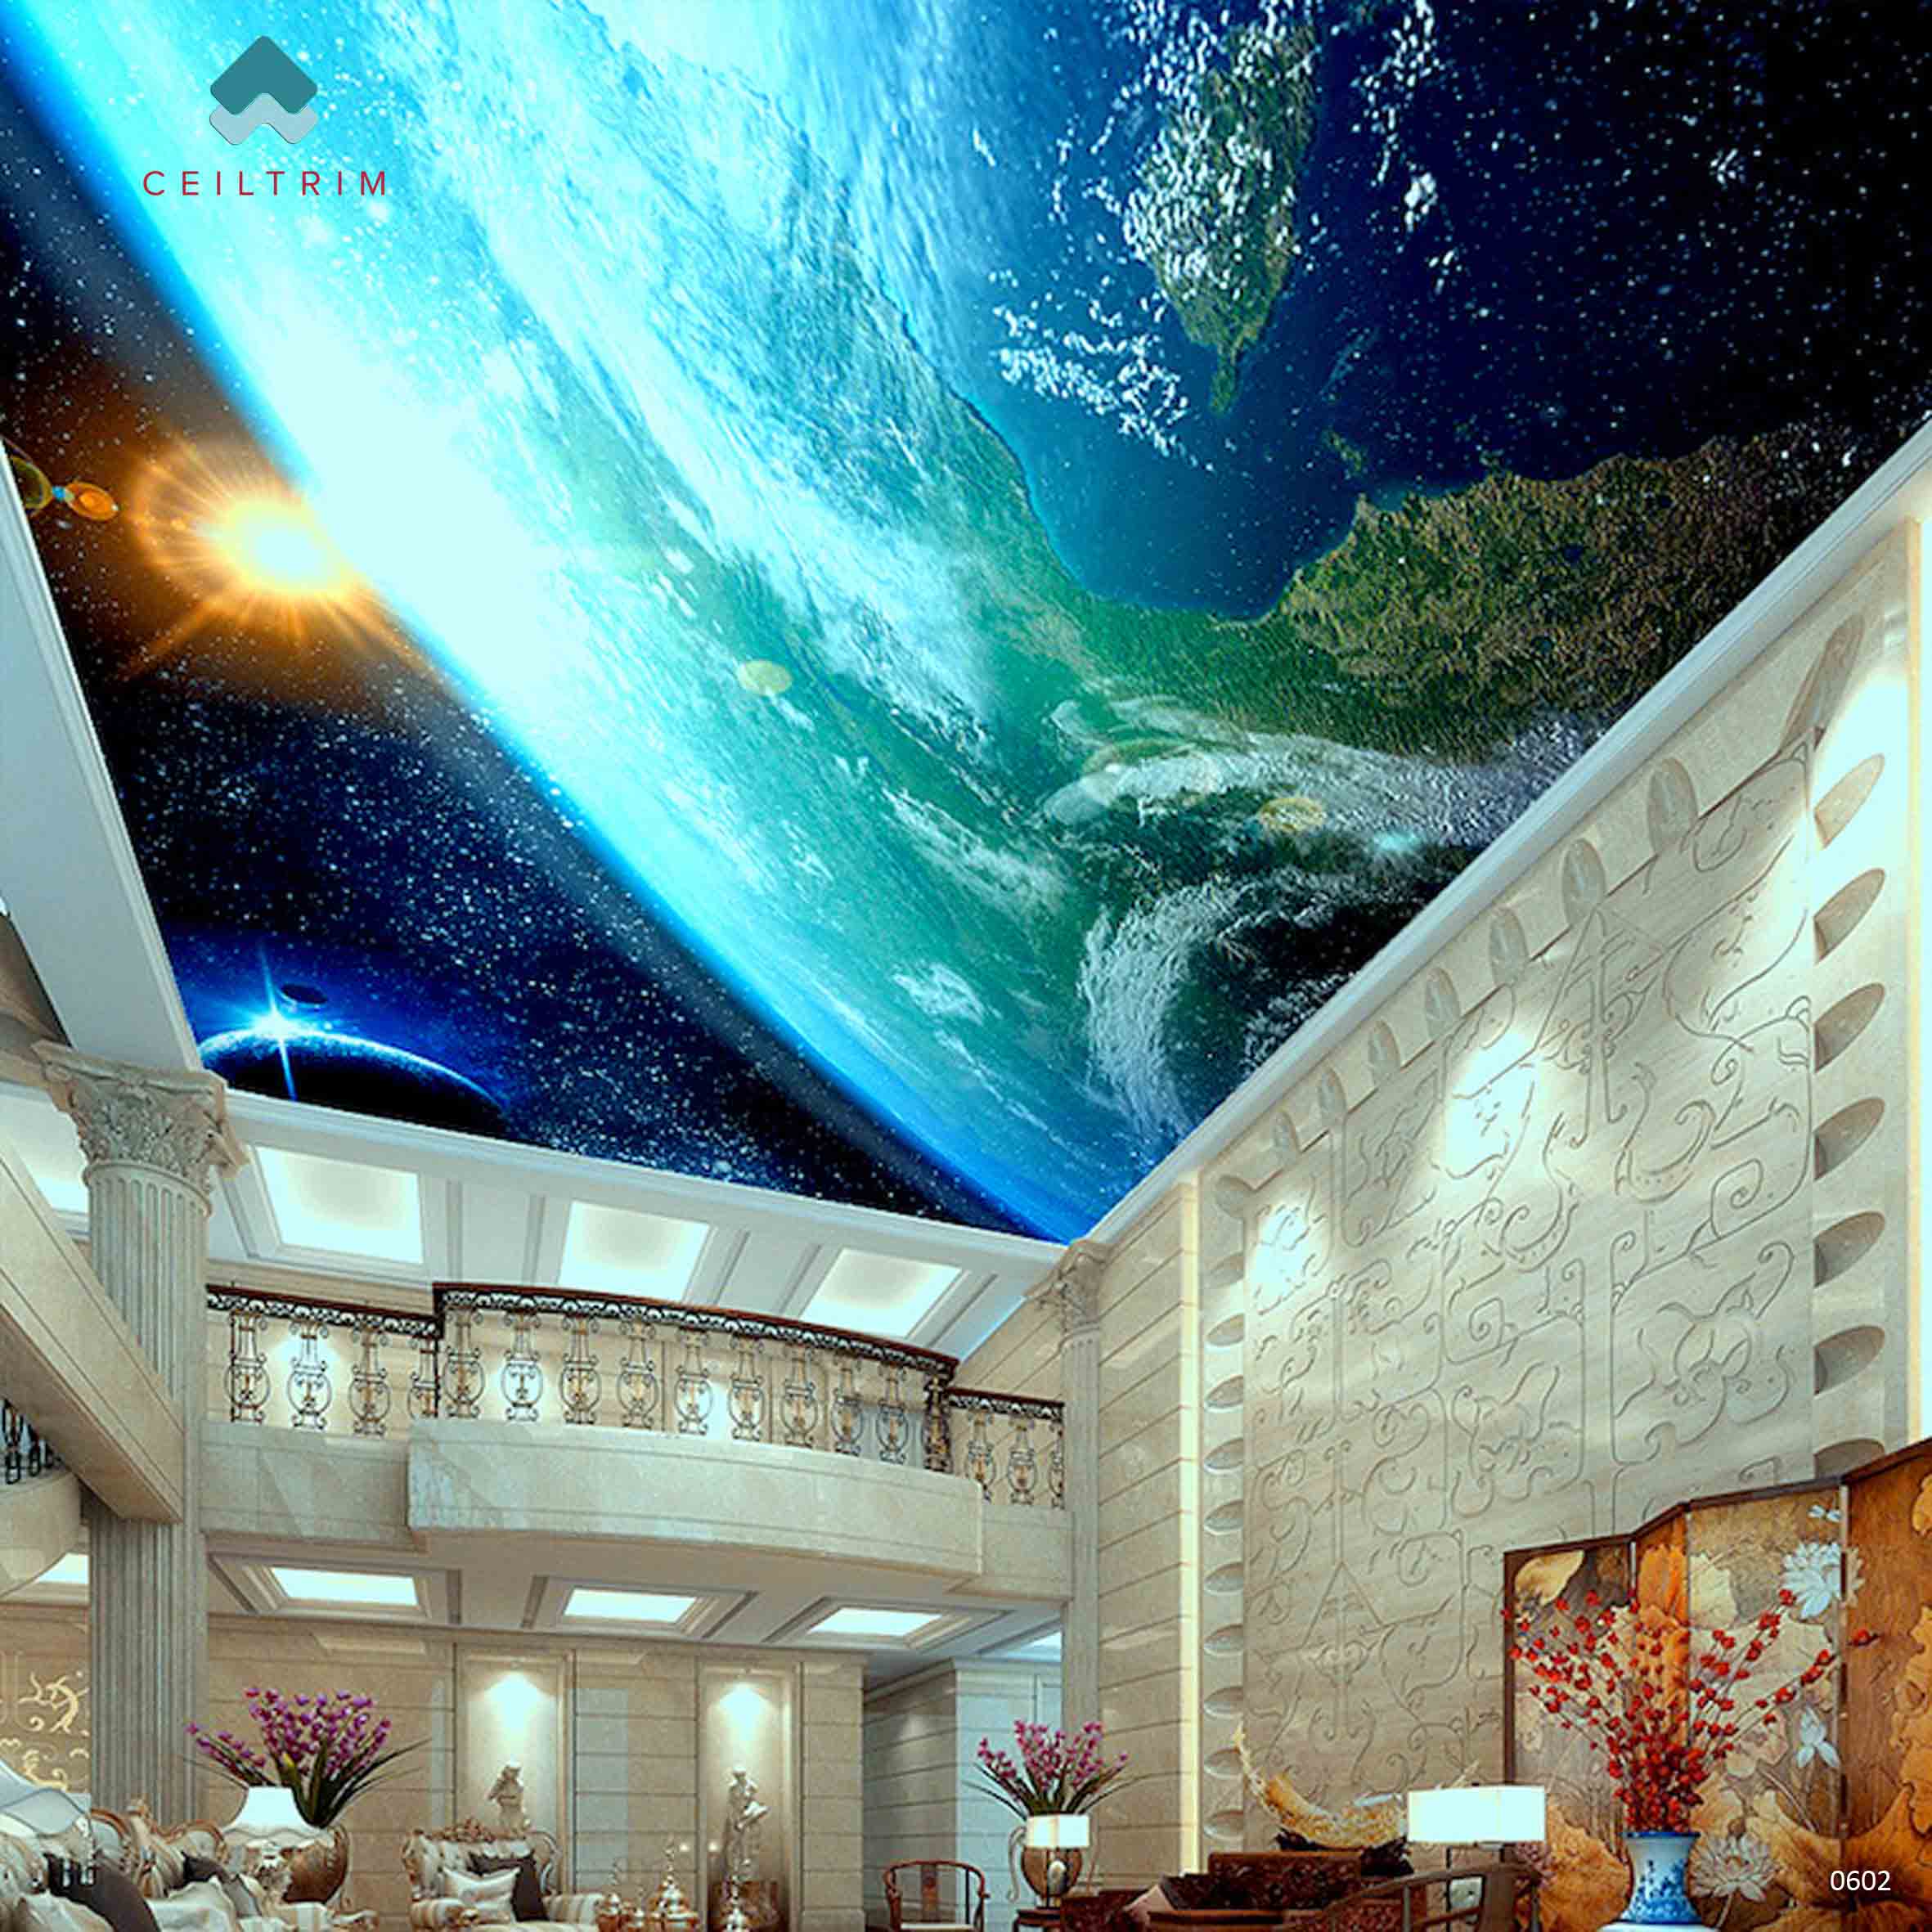 The WOW 602 CEILTRIM photo ceiling earth from outer space